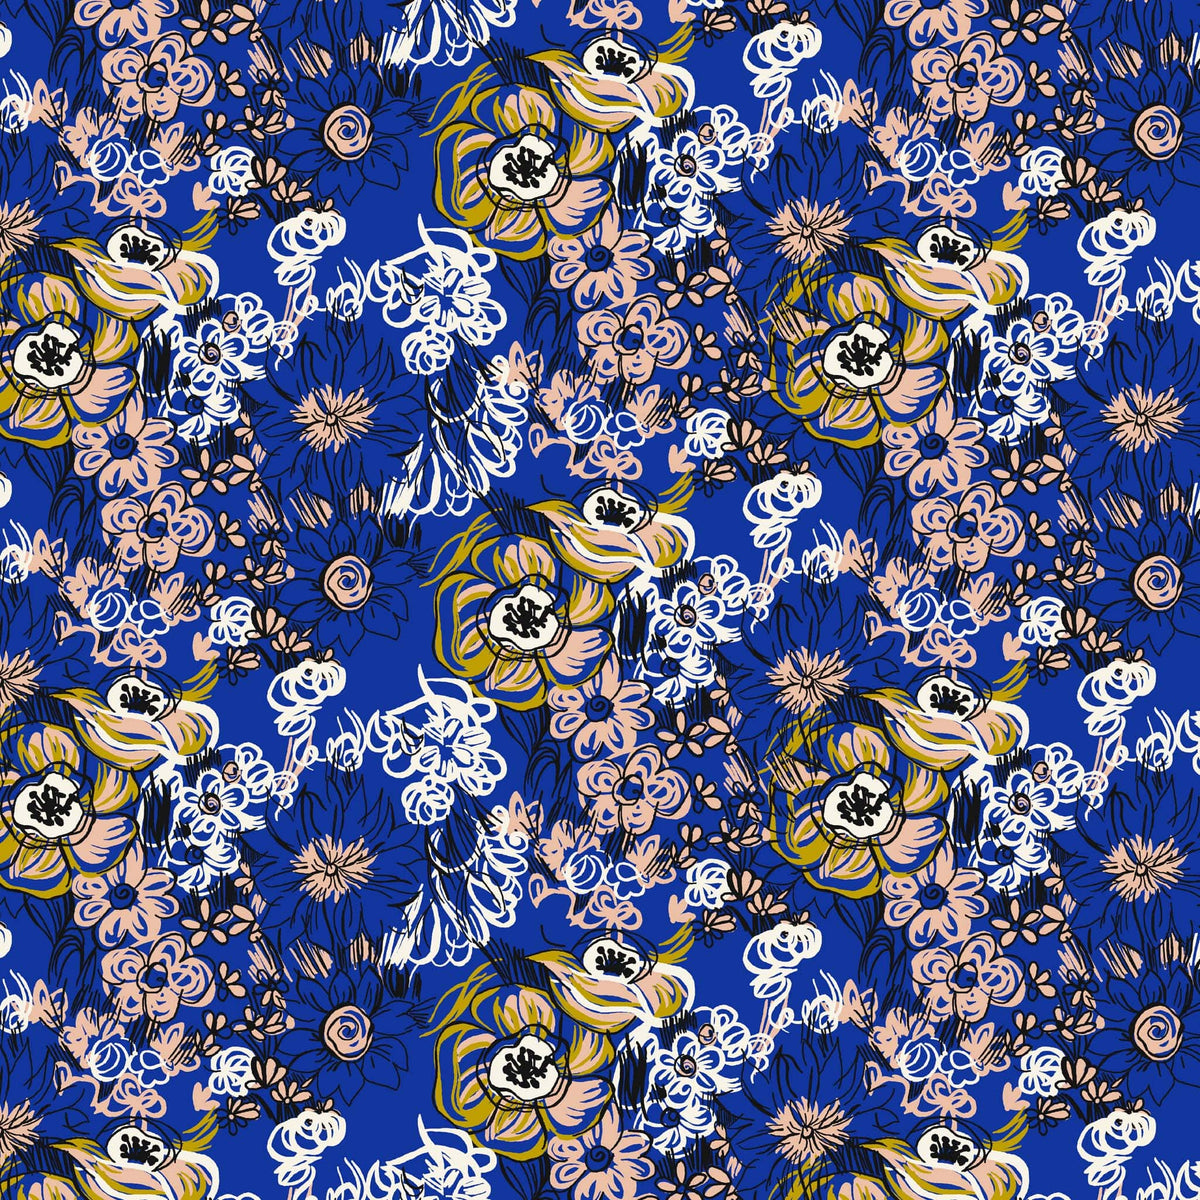 Windy Floral Fabric